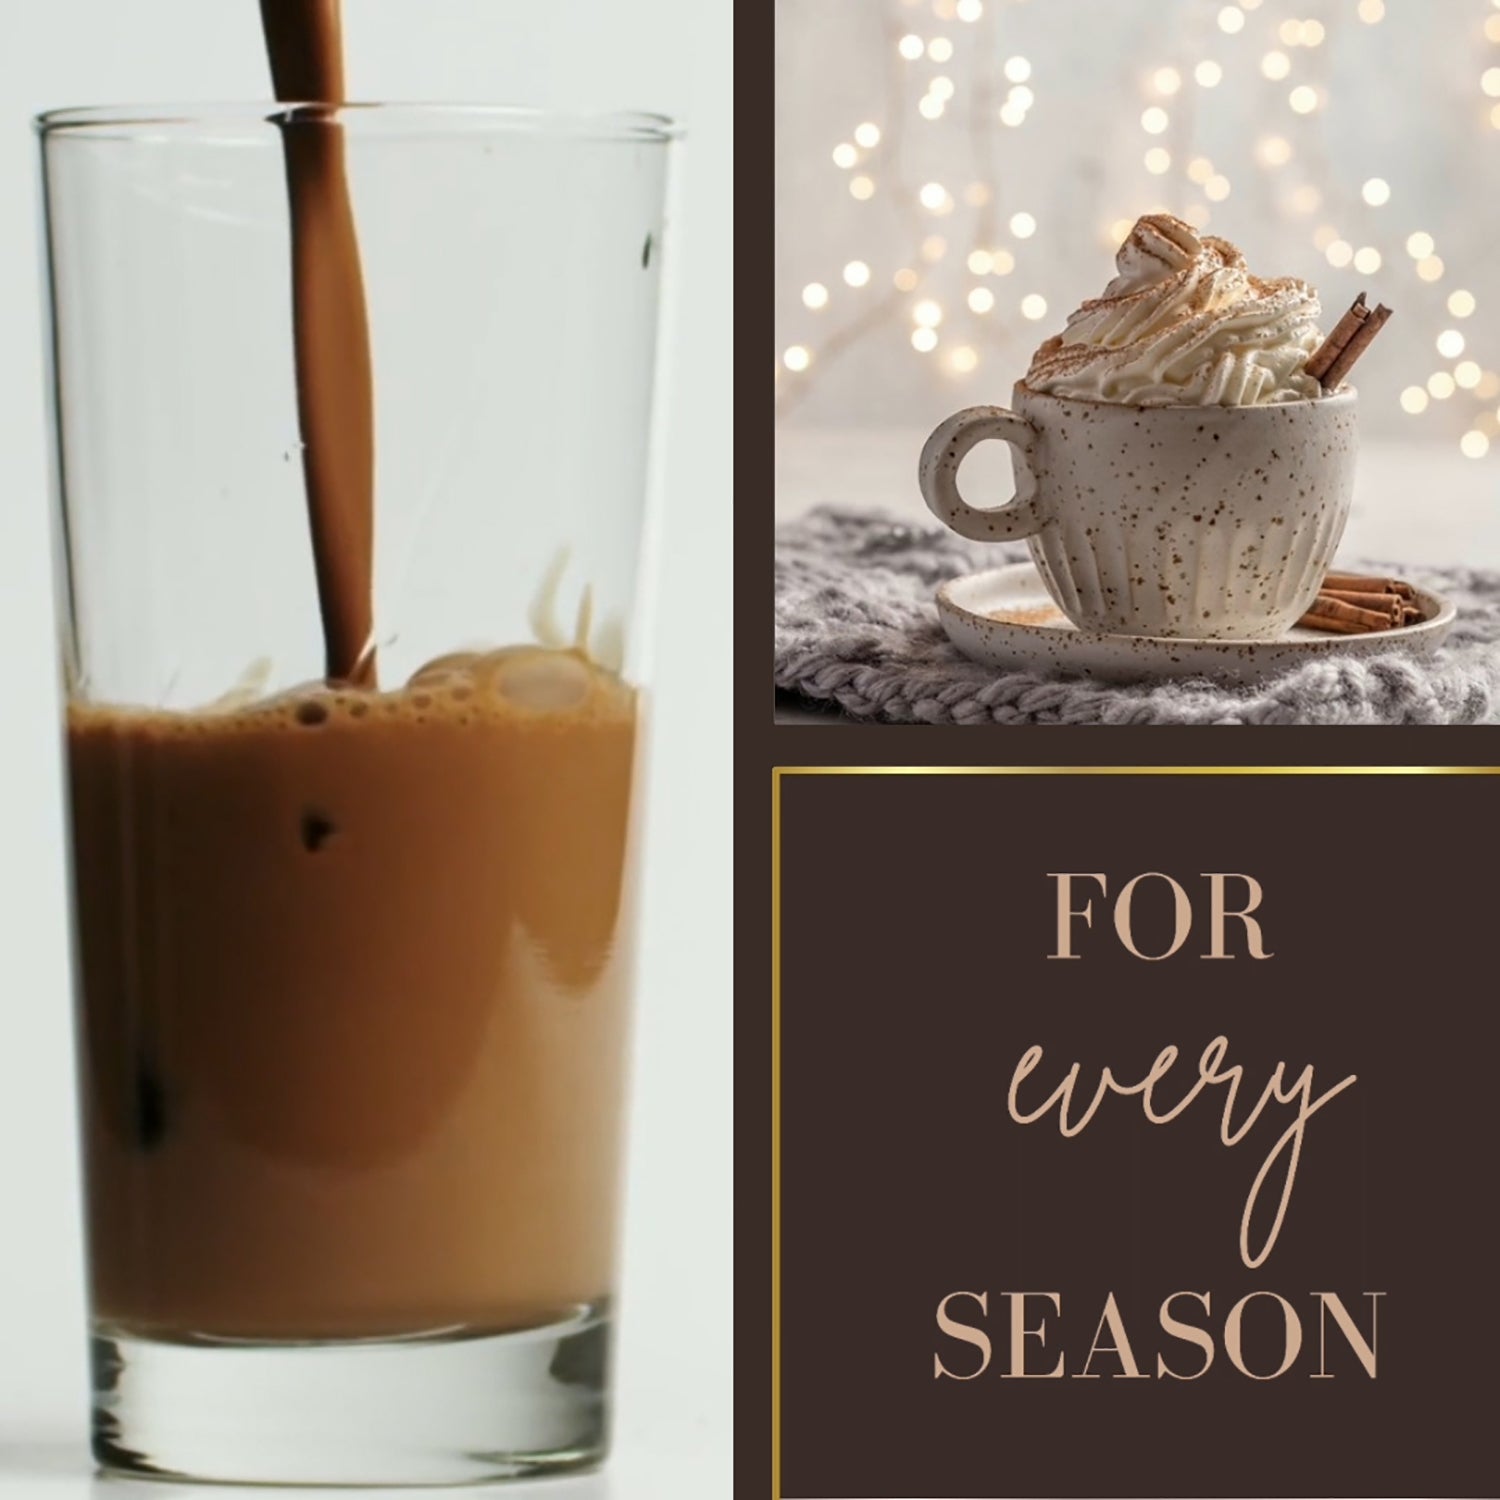 Cocosutra Hot Chocolate Mix - All Season Drinking Chocolate